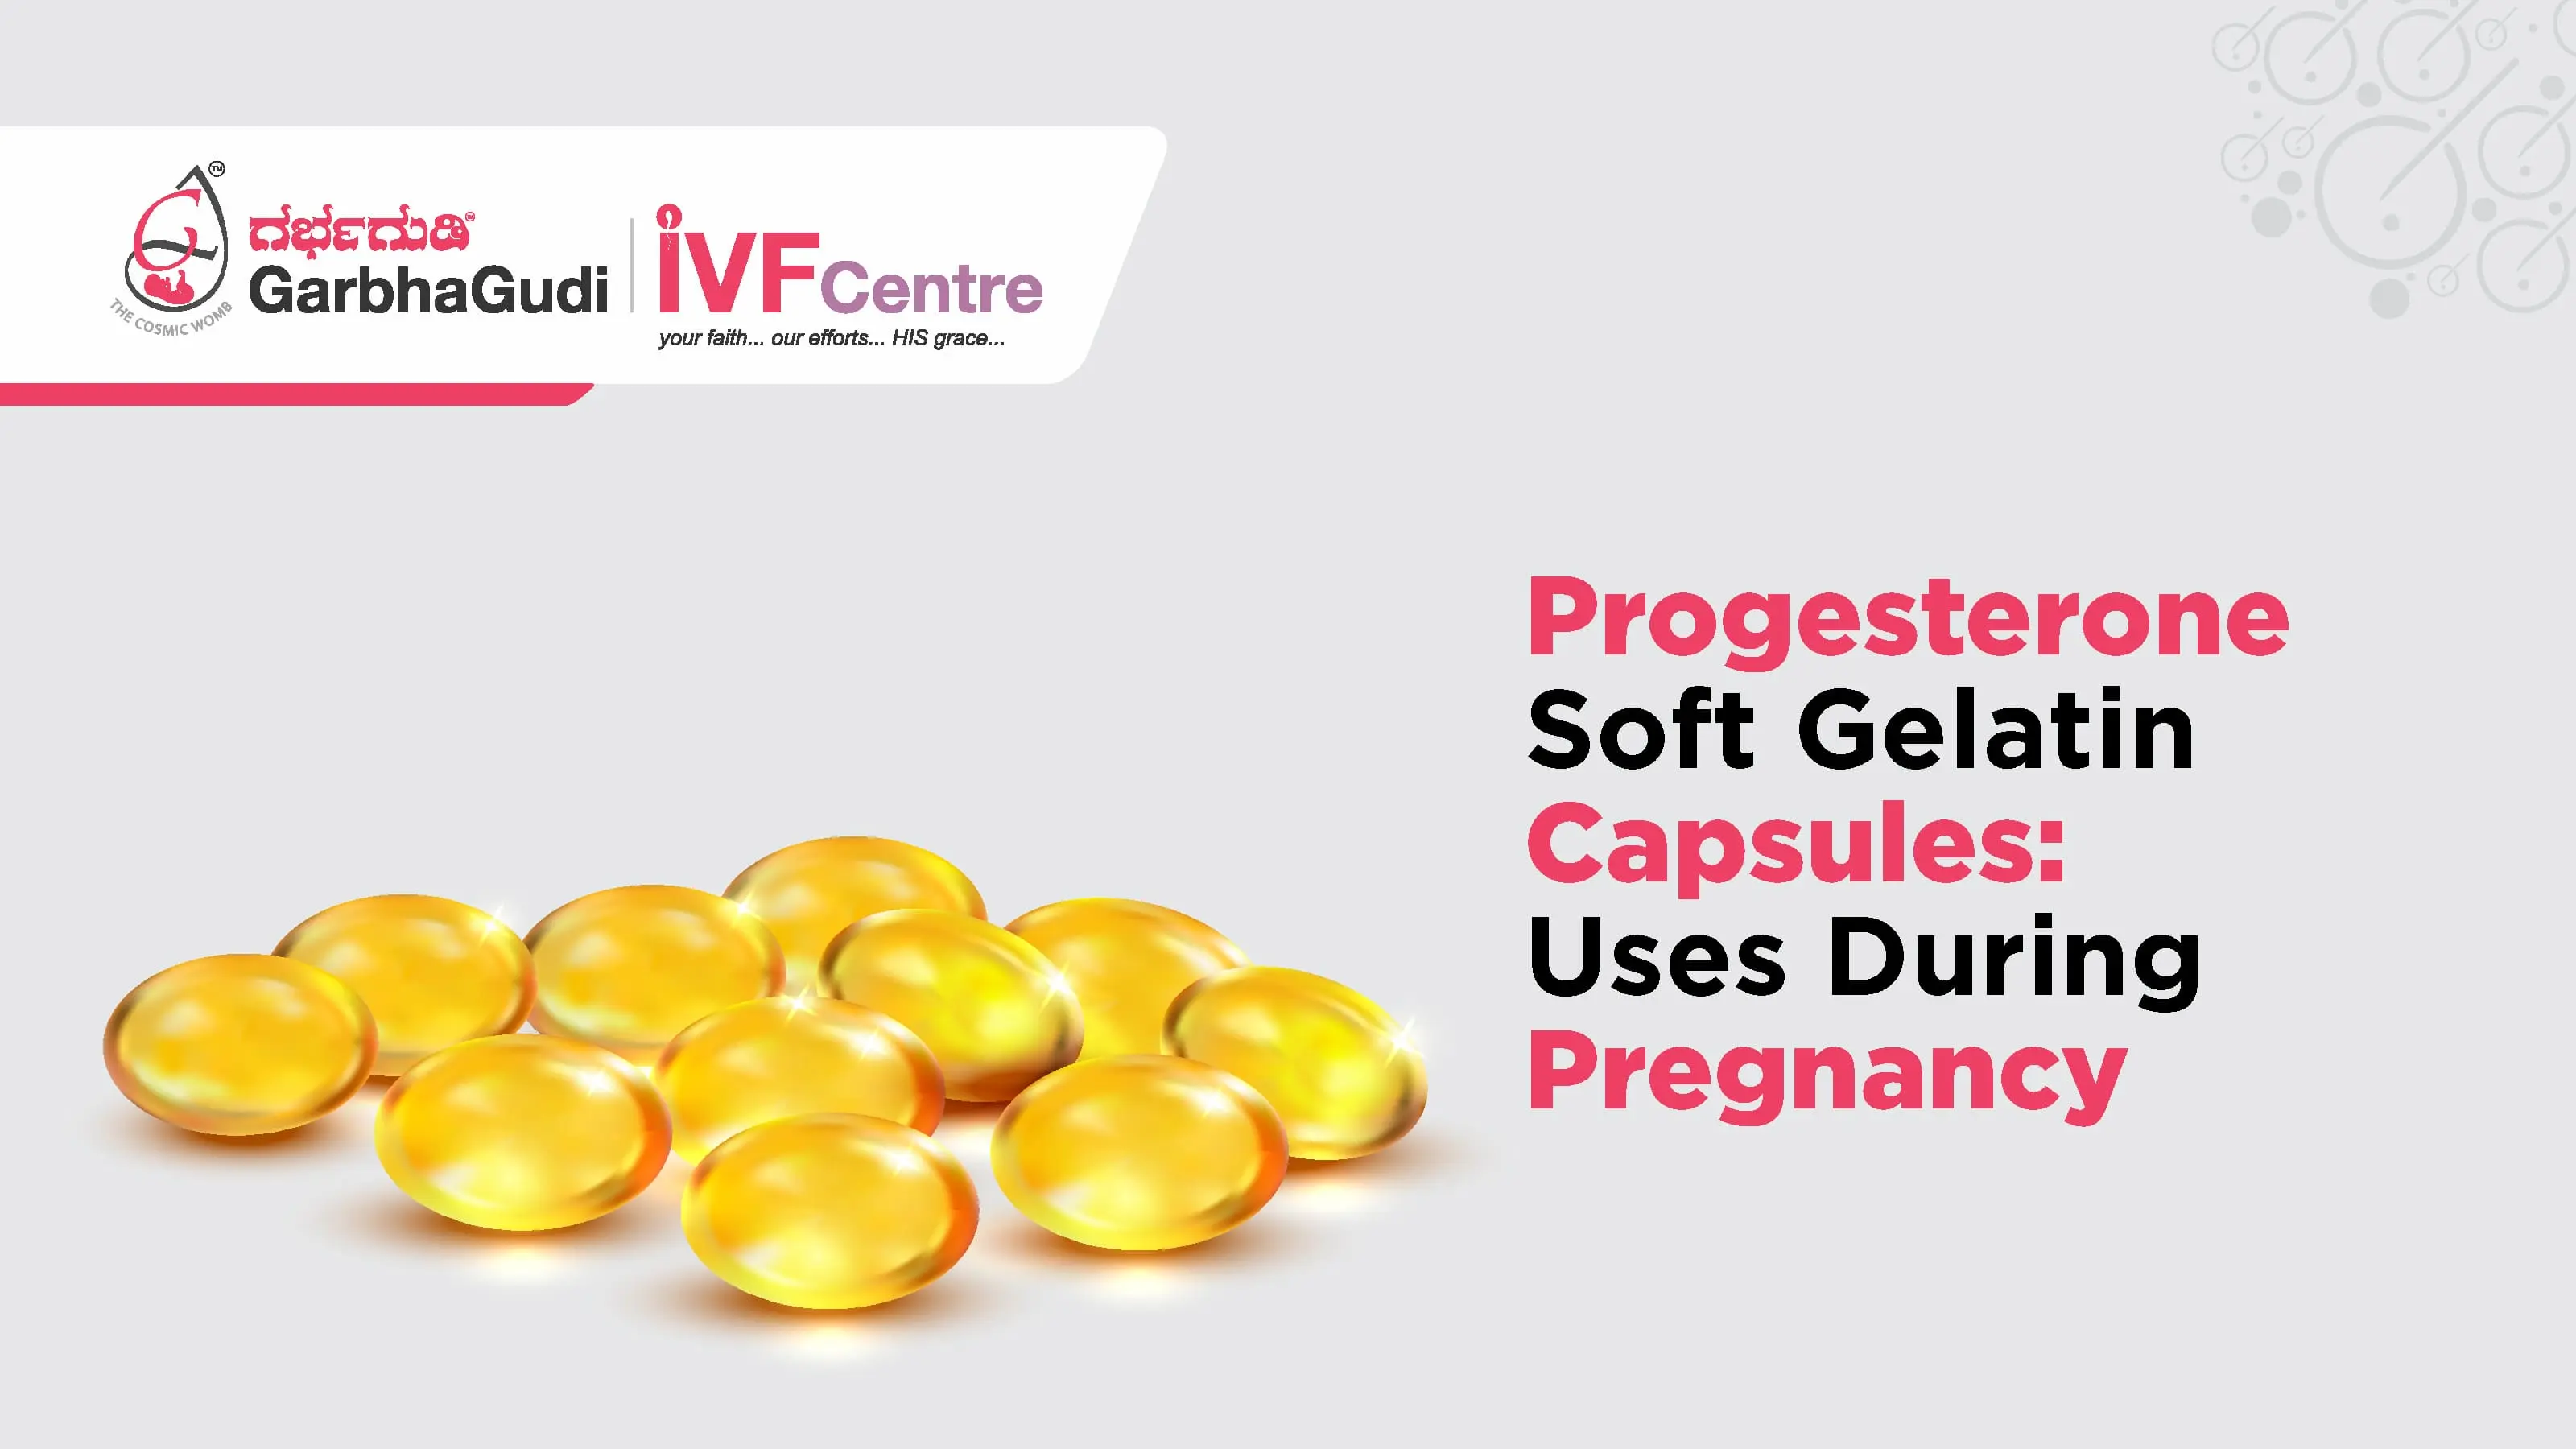 Progesterone Soft Gelatin Capsules: Uses During Pregnancy